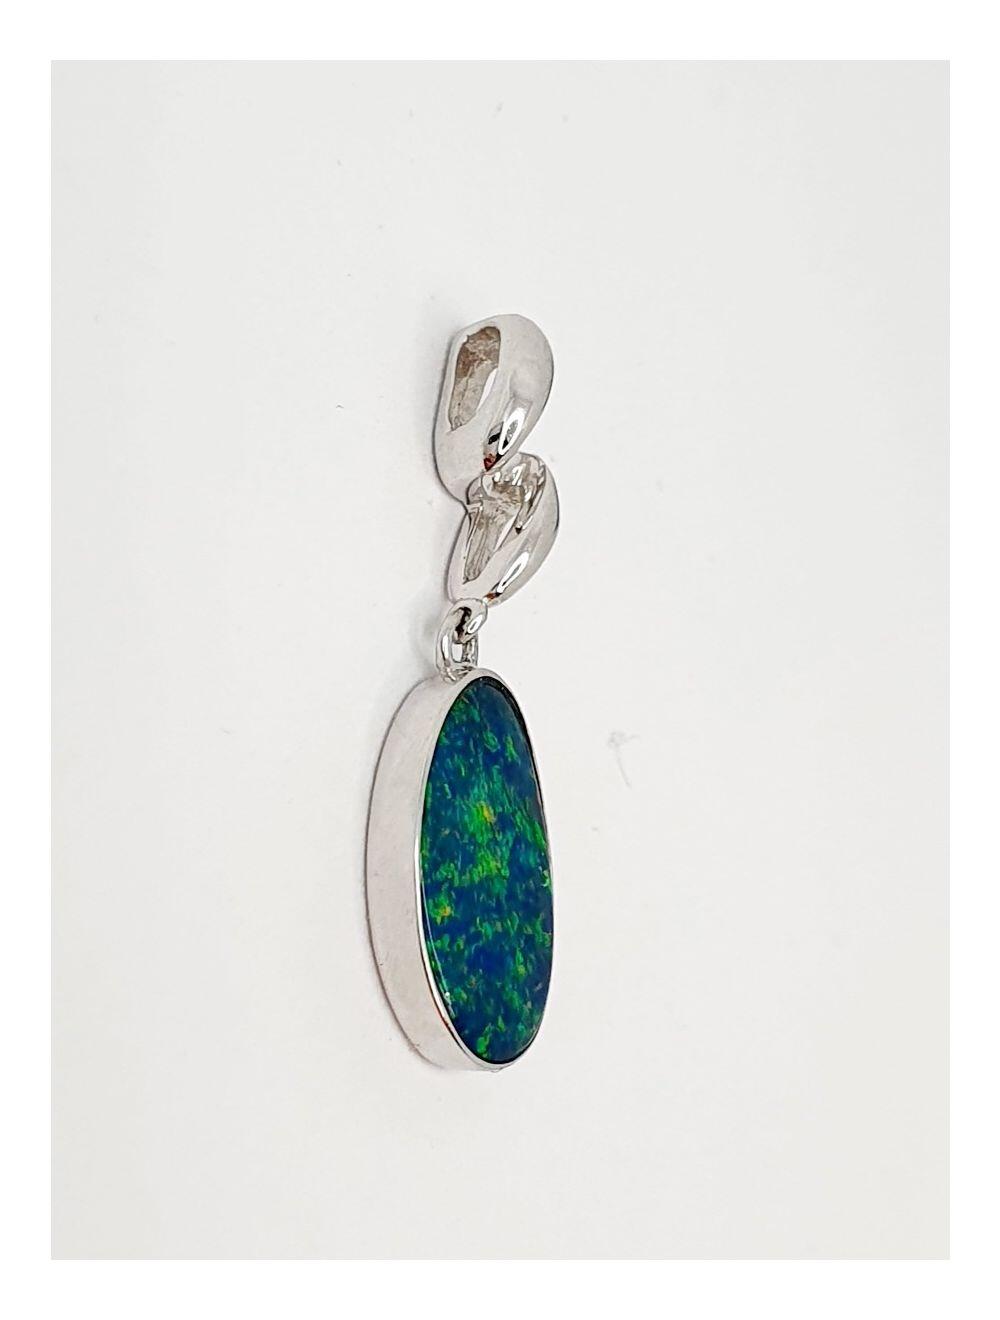 # 14ct white gold pendant with opal stone